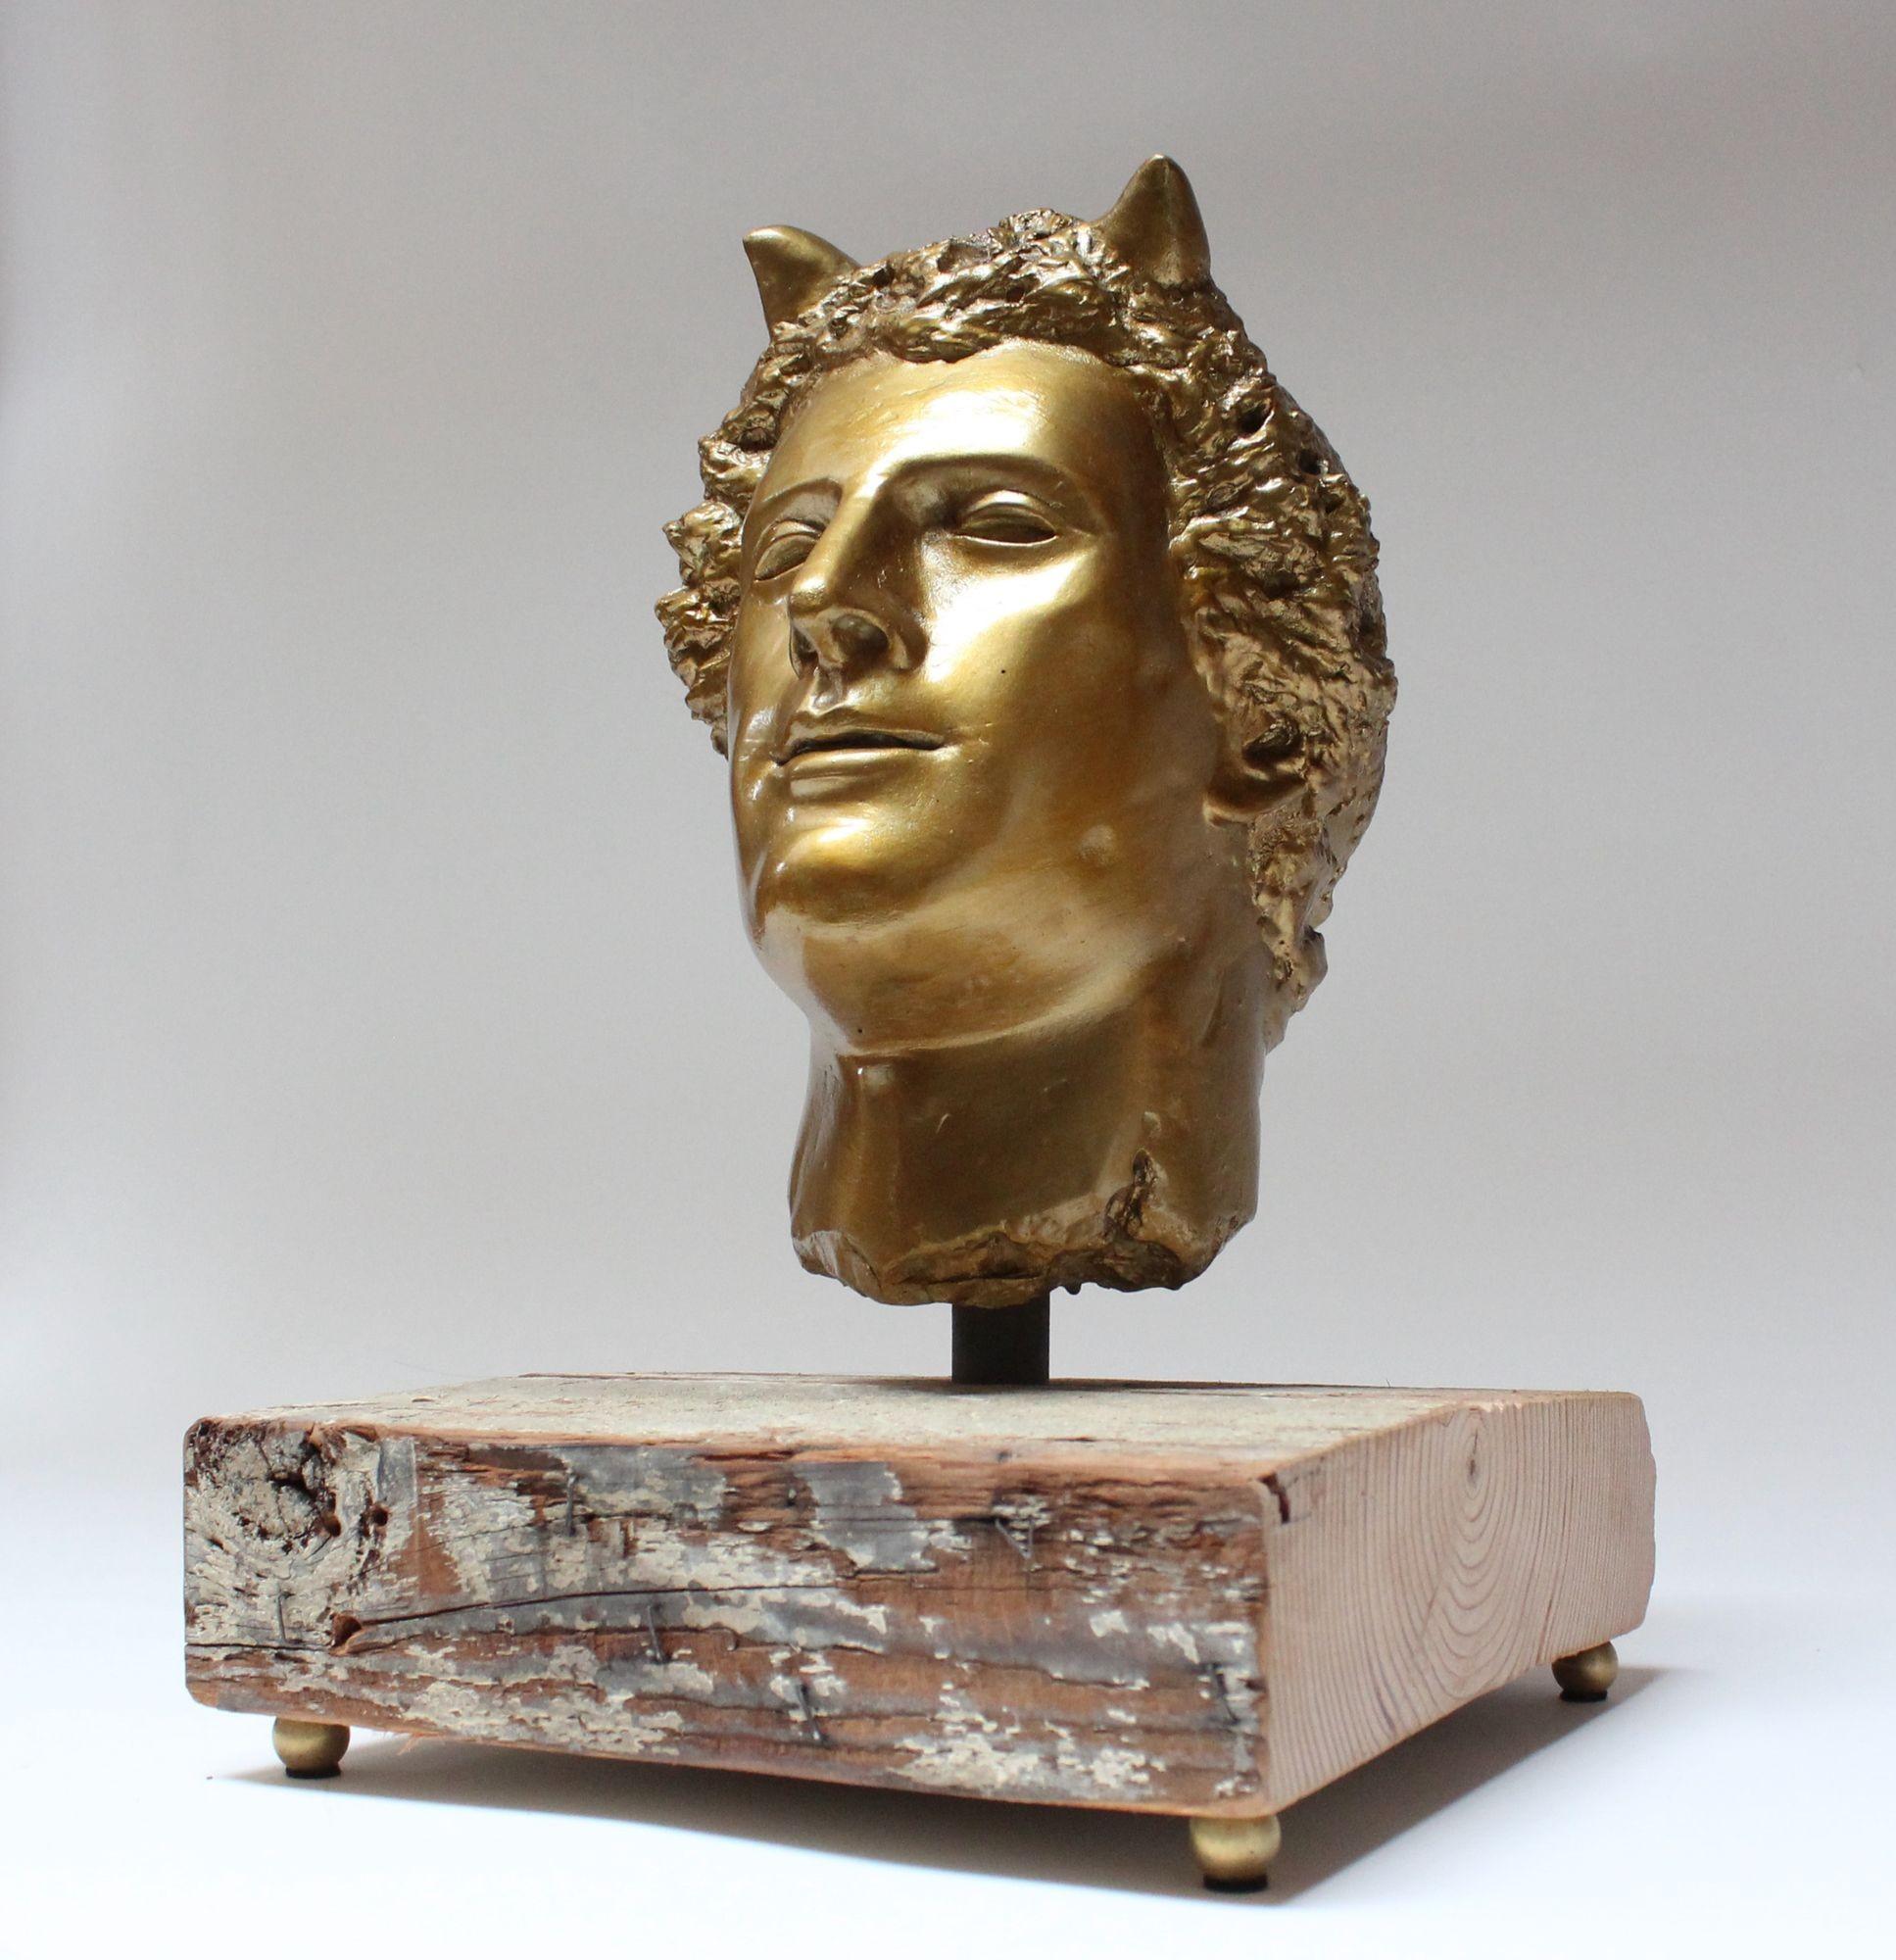 Impressive plaster cast of the mythological deity, Pan, finished in gold paint and mounted via a steel rod to a wooden plank supported by brass orb feet (ca. 1970s, USA).
Very good, lightly condition restored (gold paint has been lightly touched